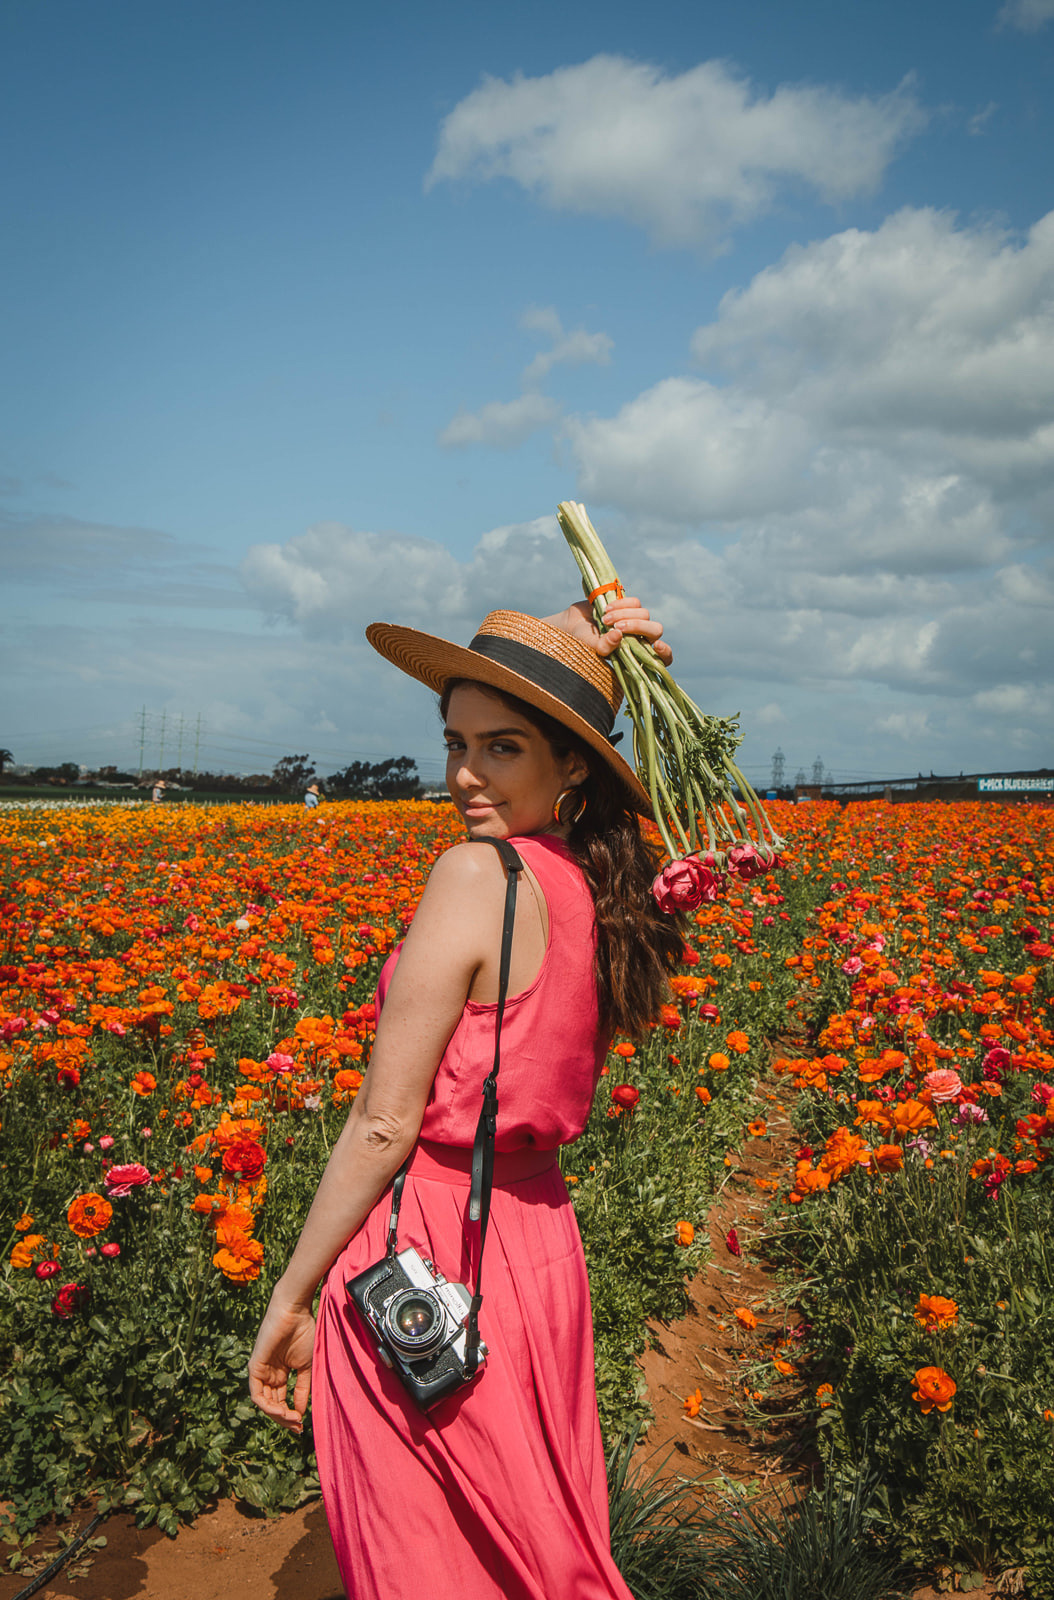 How to pose at a flower field, posing with flowers, flower field photoshoot, flower field photoshoot poses inspo, flower photoshoot - Palm Trees and Pellegrino